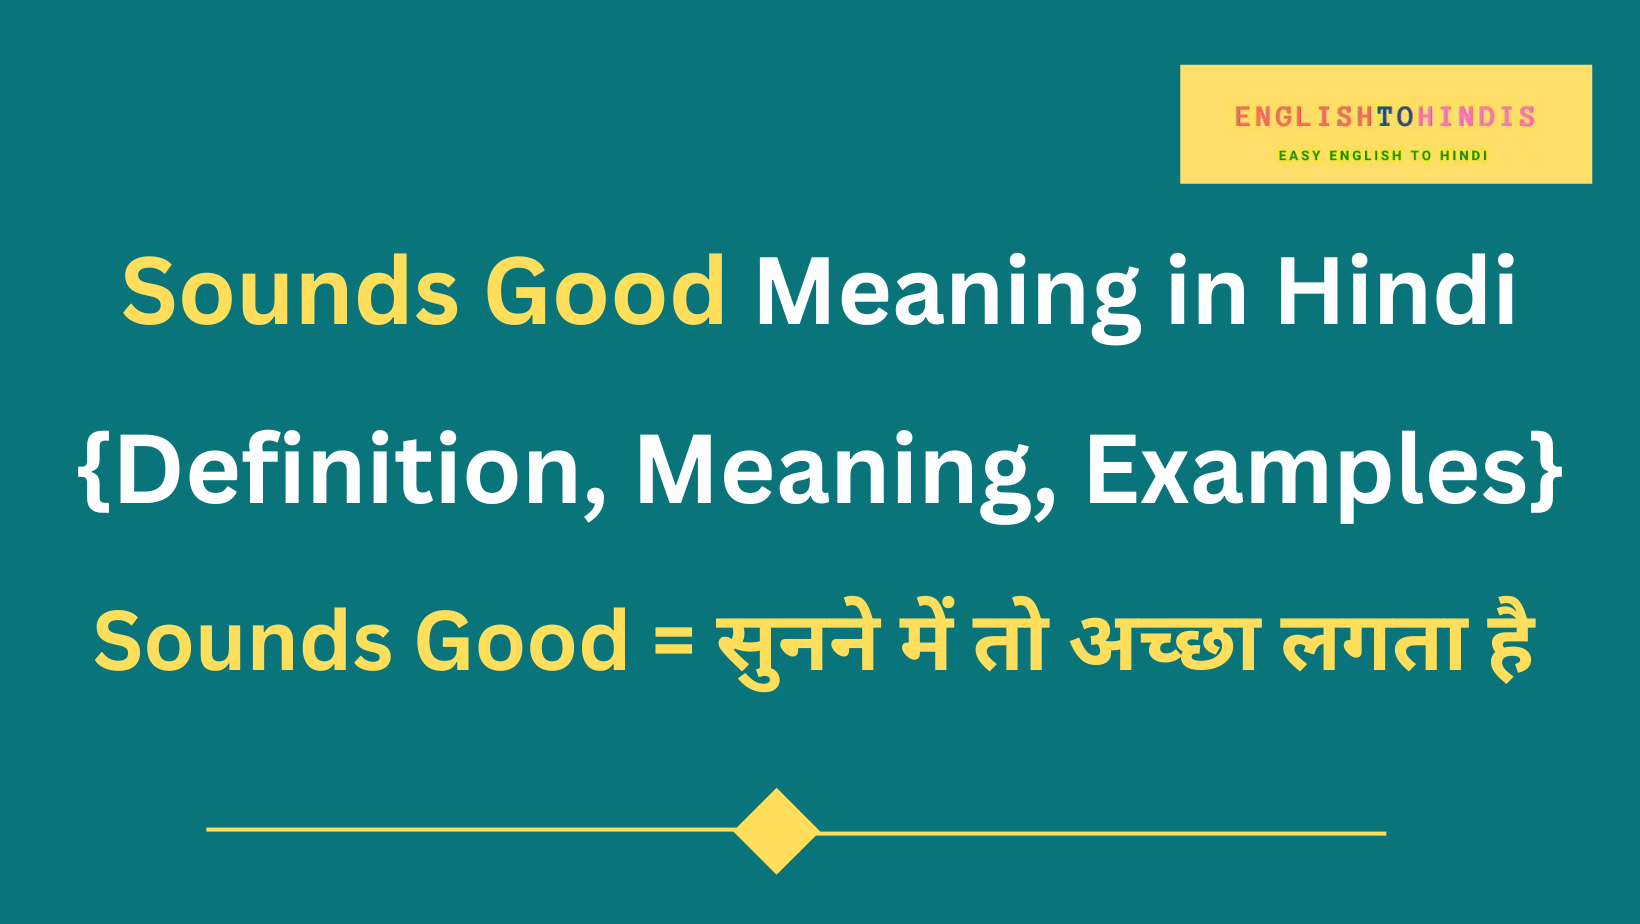 Sounds Good Meaning in Hindi